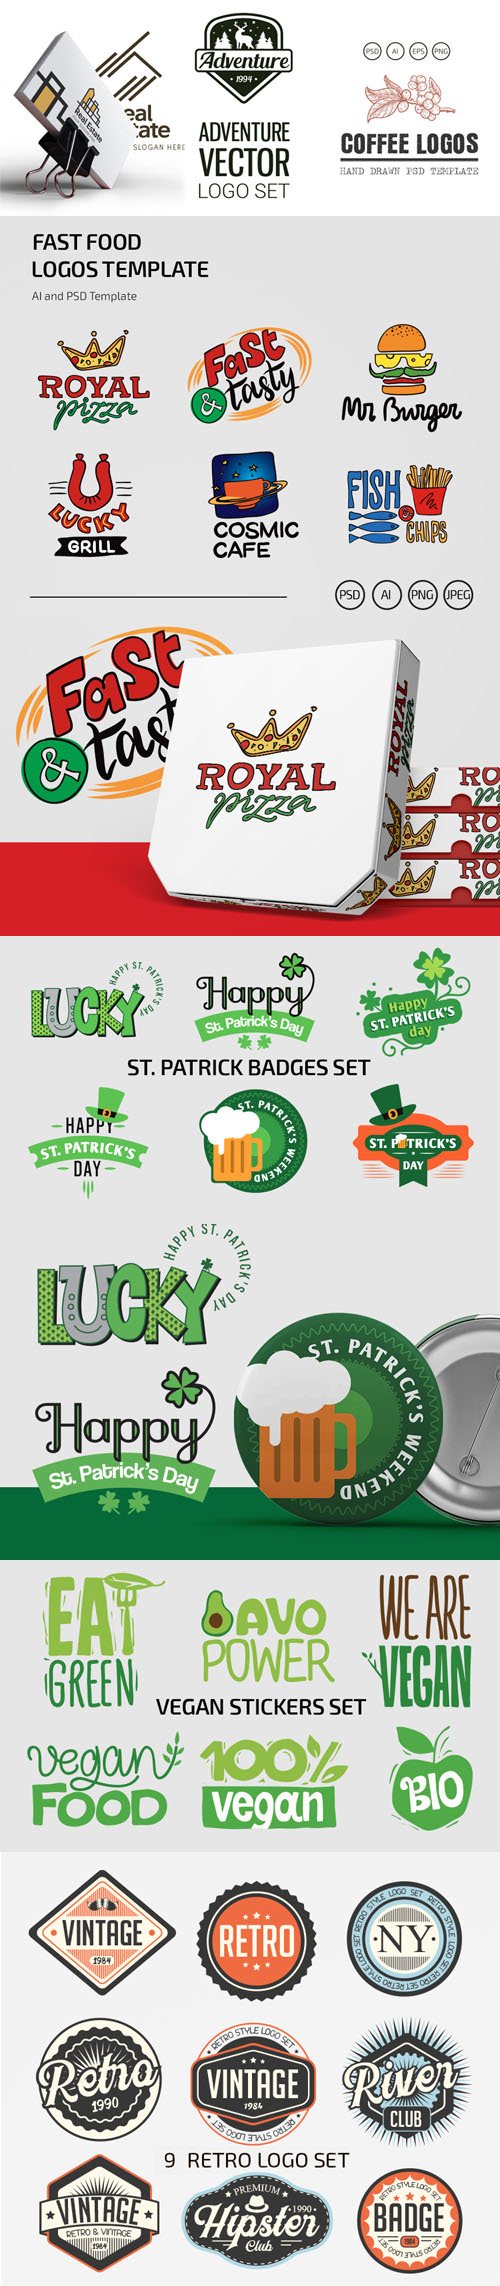 Vector Collection of Logos, Badges and Stickers